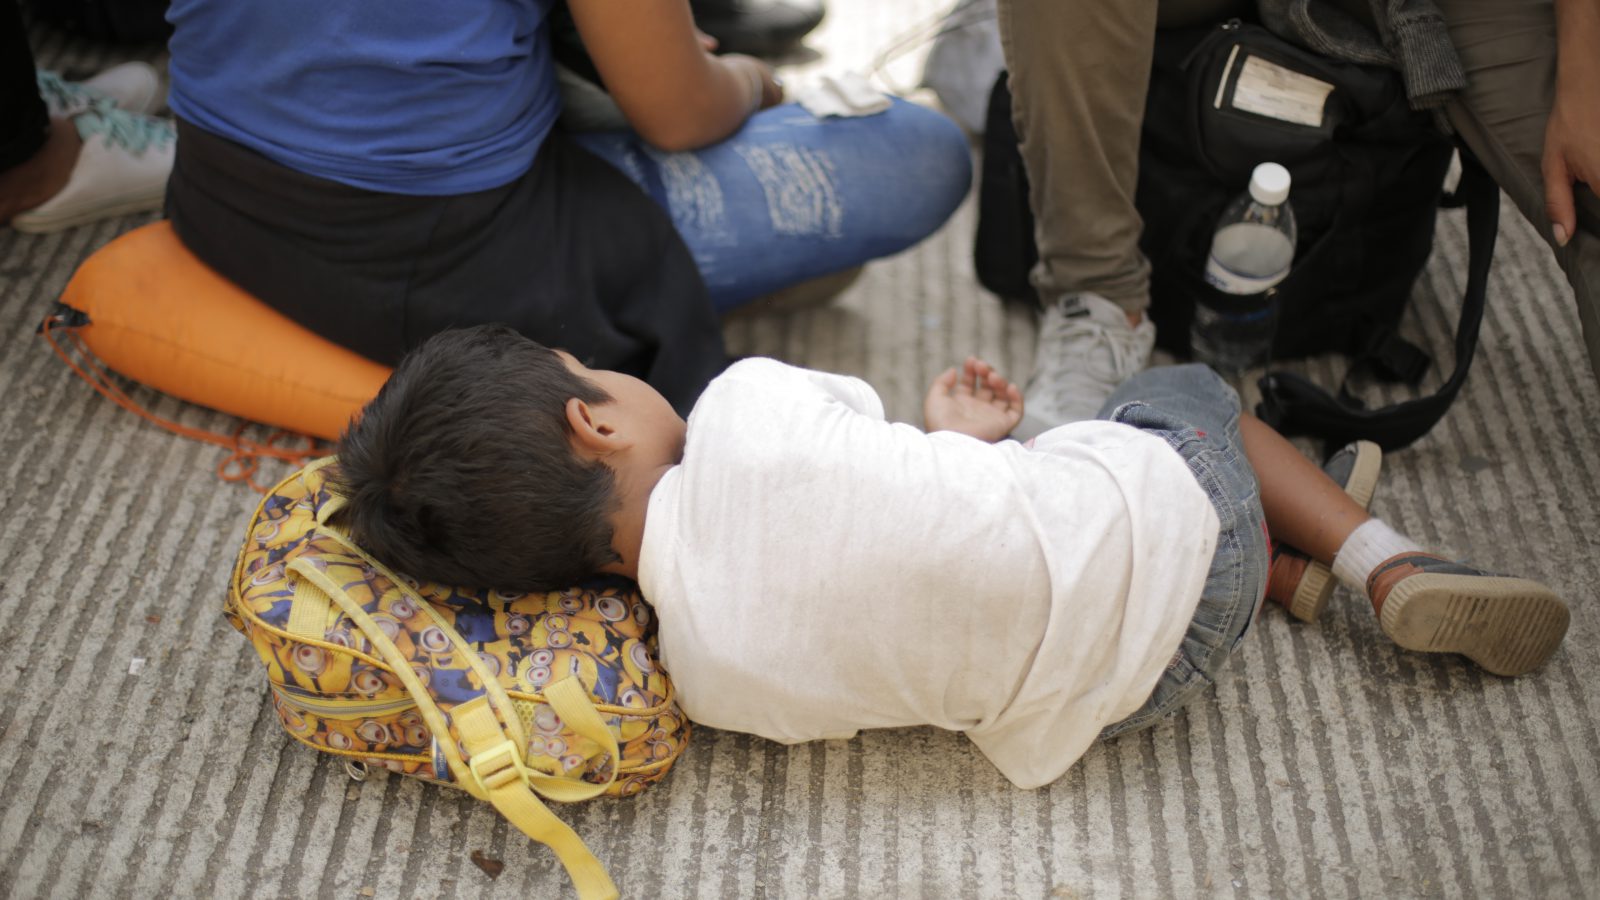 A child rests among a crowd of asylum-seekers outside an immigration office on the outskirts of Mexico City. In the last few years, an unprecedented number of unaccompanied children have been fleeing from gang violence in Central America. Many are arriving at the U.S. southern border alone, scared and seeking refuge.